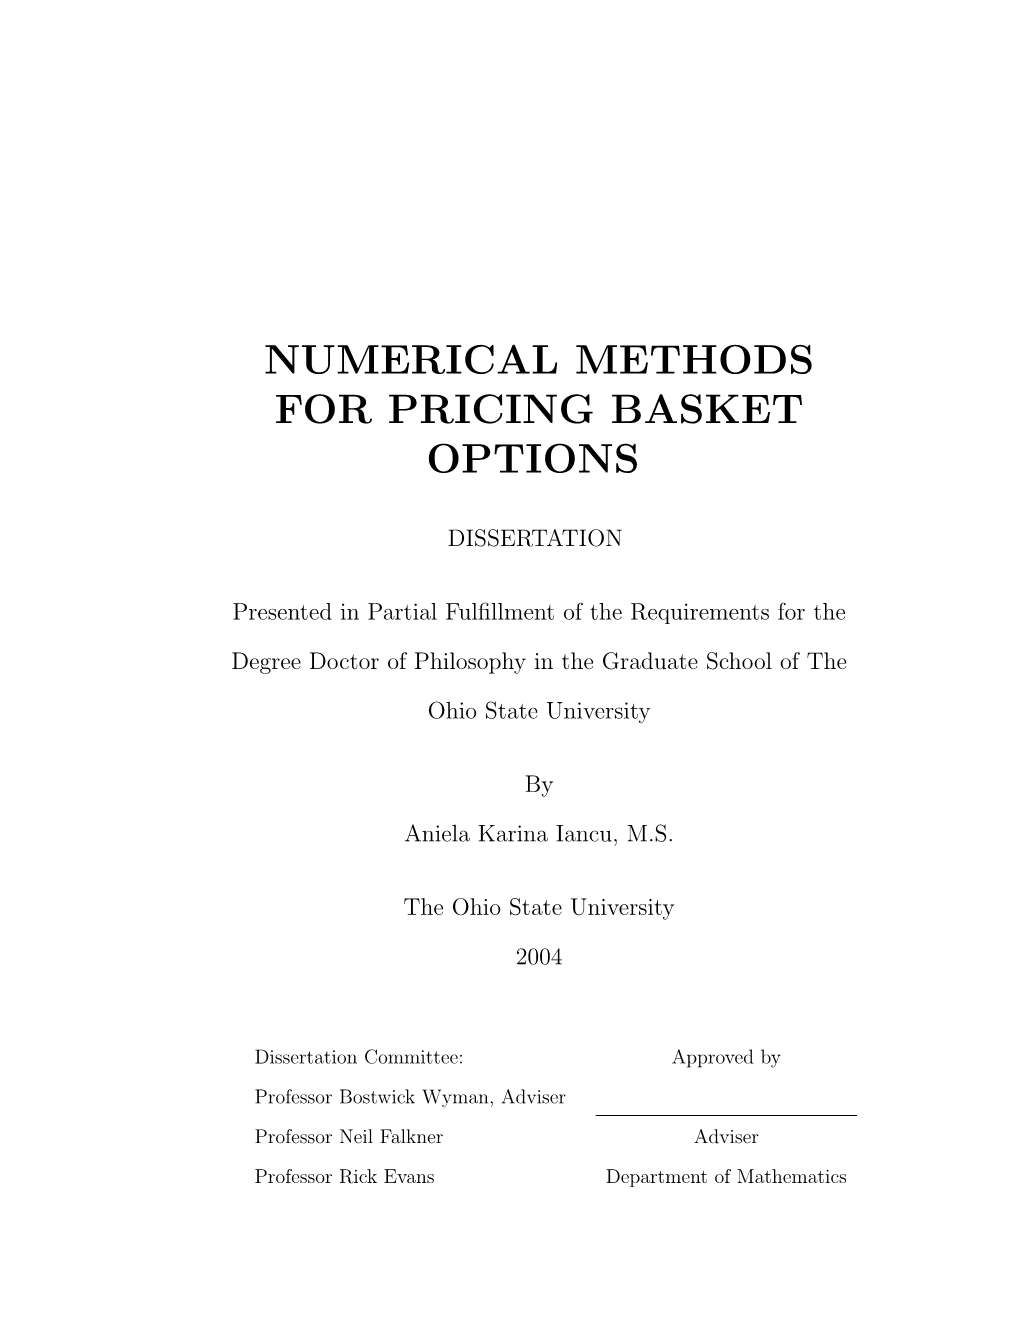 Numerical Methods for Pricing Basket Options